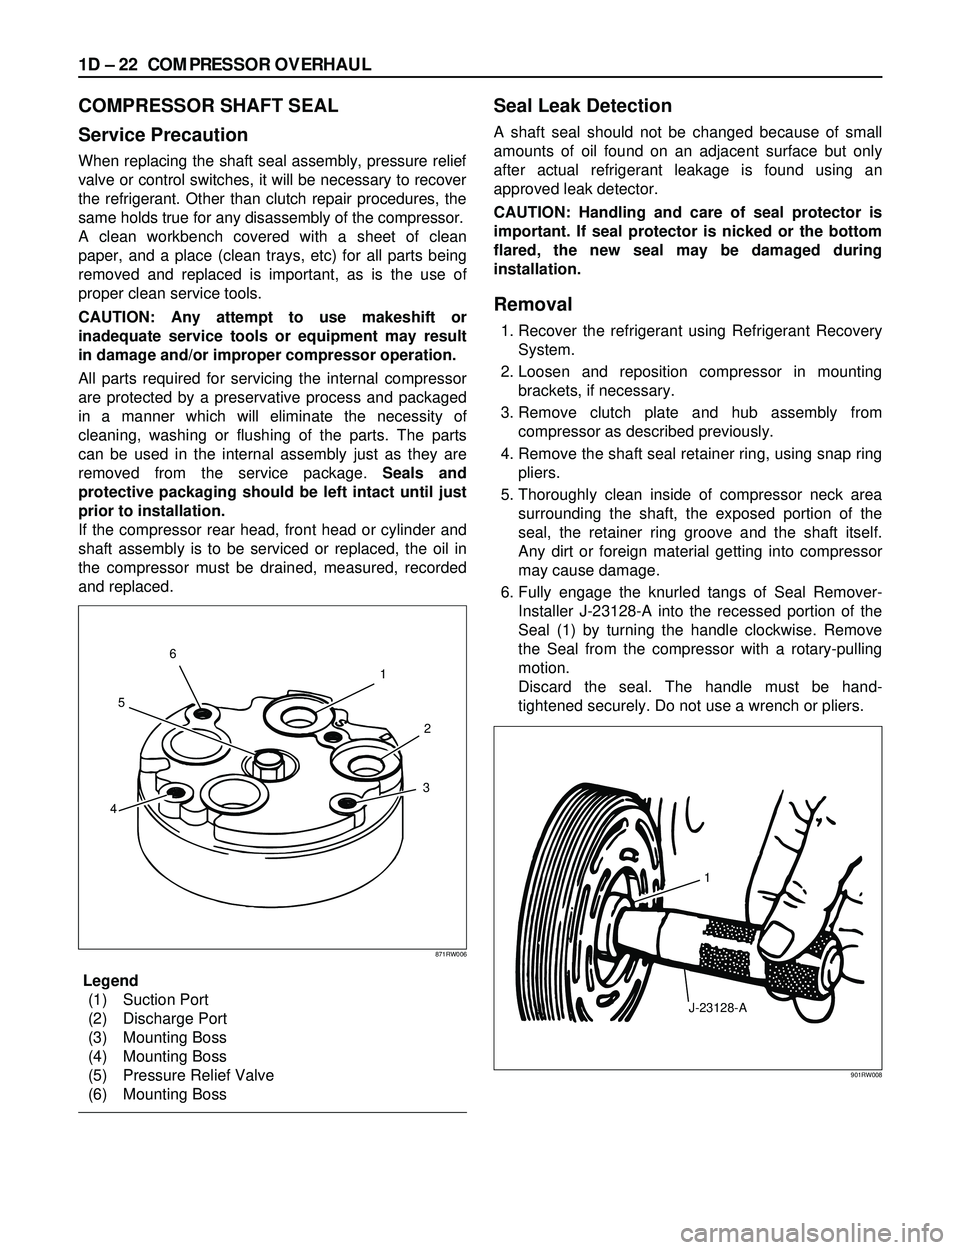 ISUZU TROOPER 1998  Service Repair Manual 1D Ð 22 COMPRESSOR OVERHAUL
COMPRESSOR SHAFT SEAL
Service Precaution
When replacing the shaft seal assembly, pressure relief
valve or control switches, it will be necessary to recover
the refrigerant